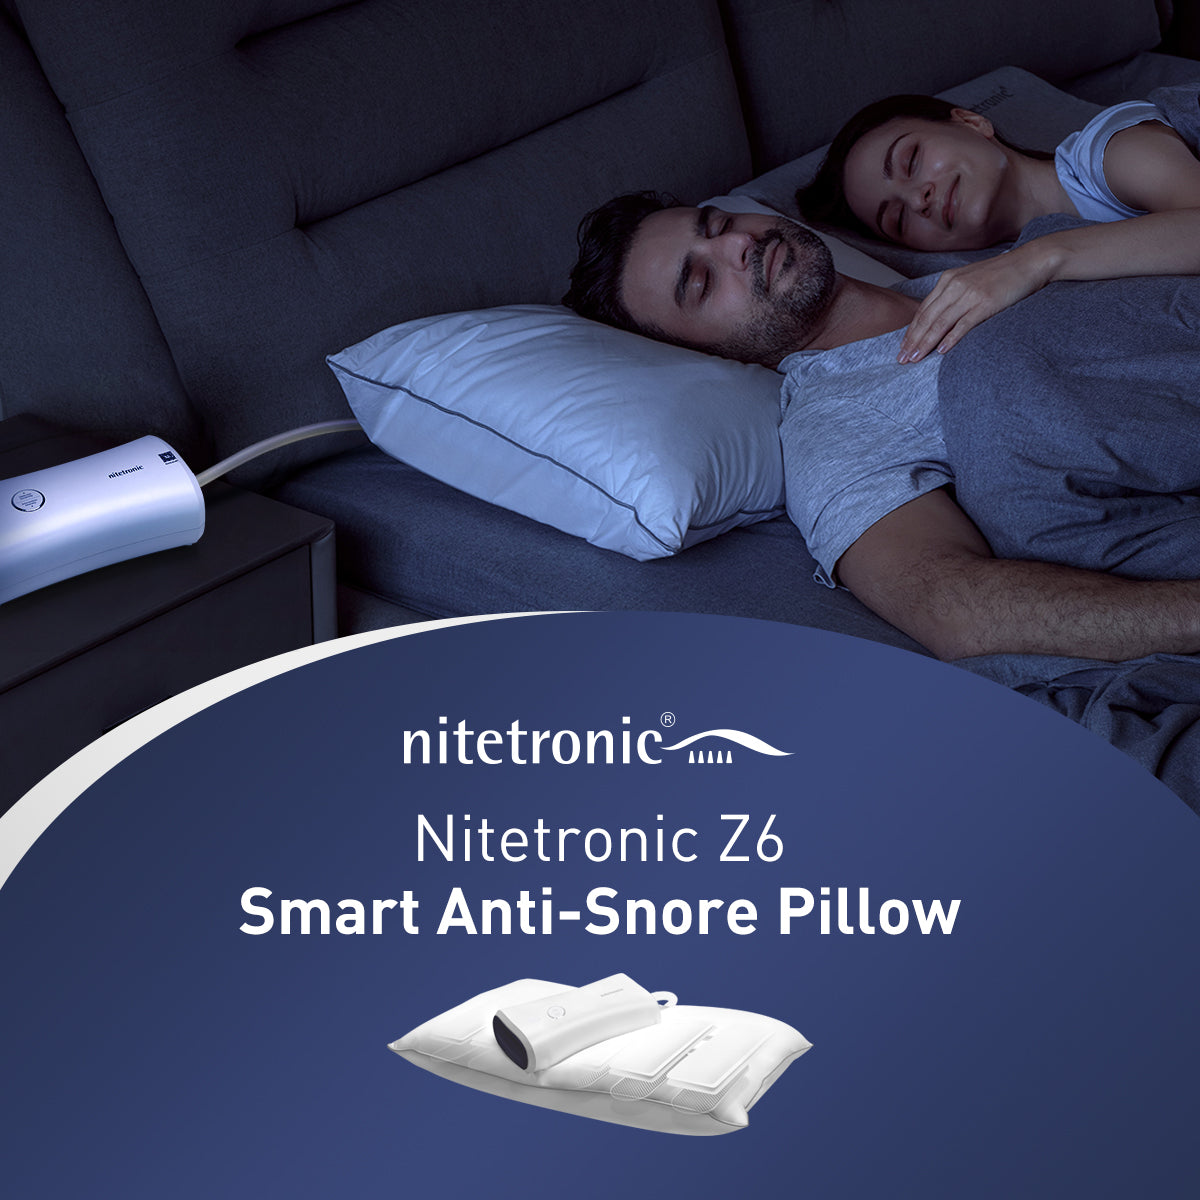 Sleep better, snore less: Nitetronic Z6 anti-snore pillow